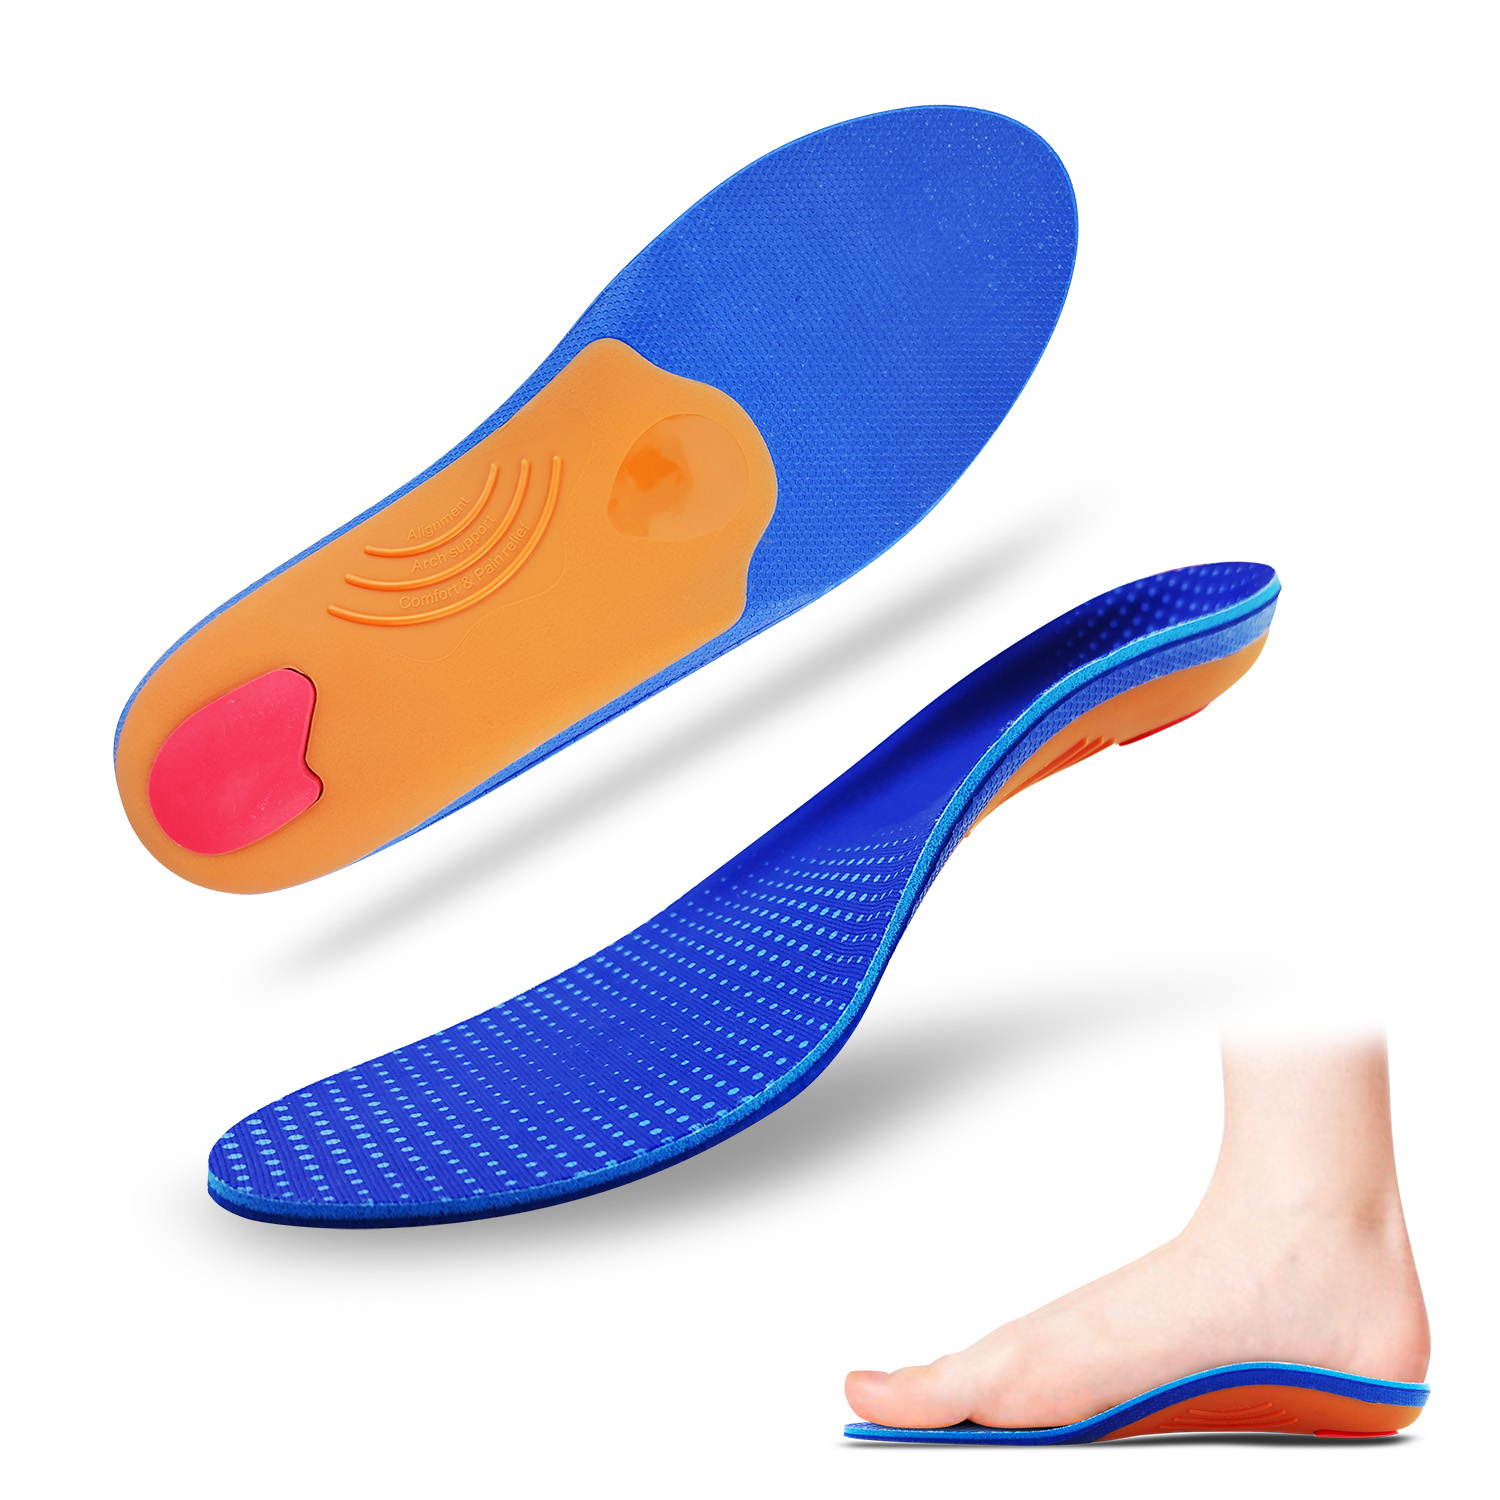 2021 New Arrival Arch support PU orthotic Insole plantar fasciitis